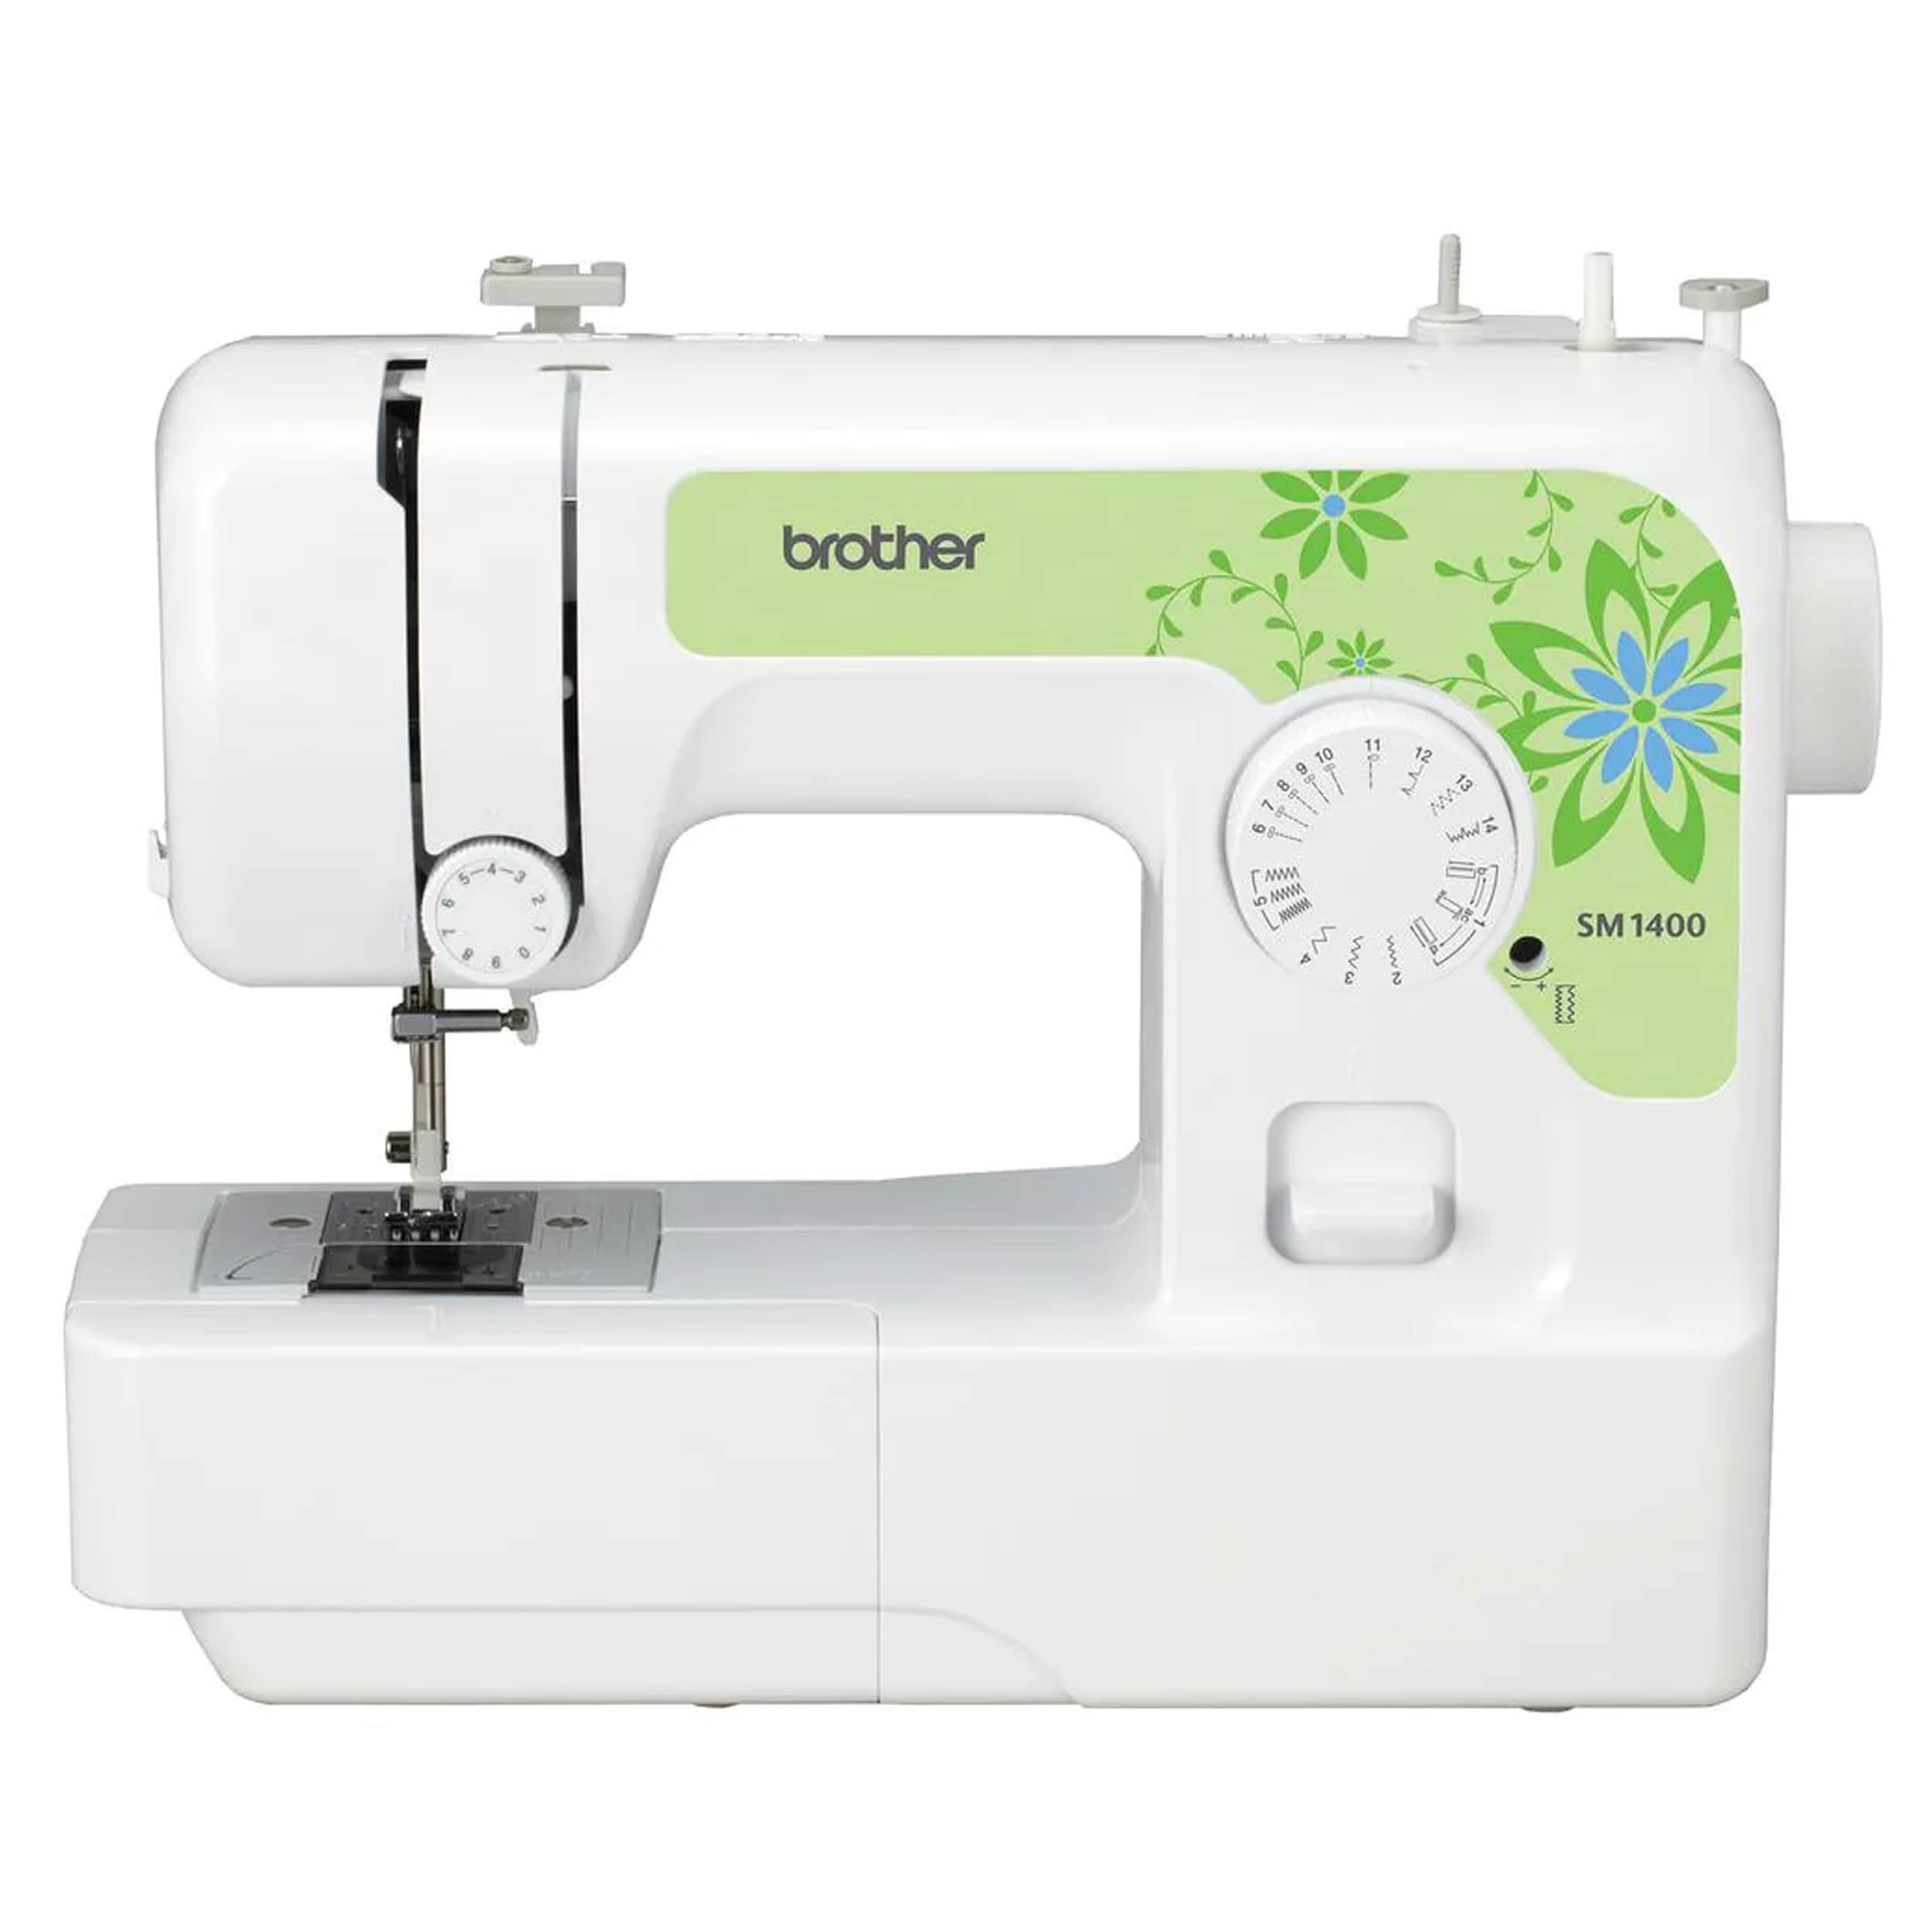 Sewing machine light Sewing Machines & Accessories at